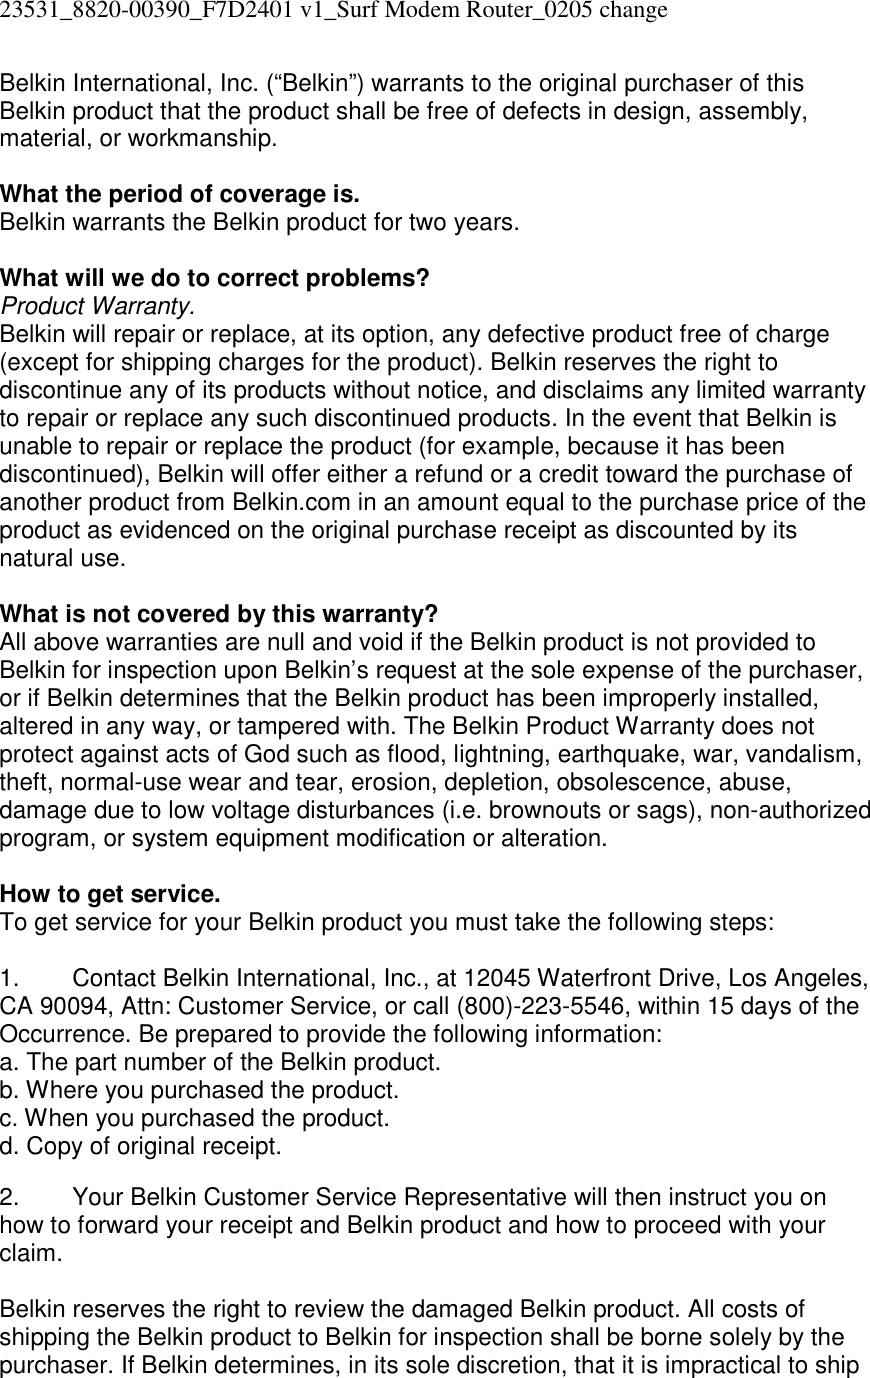 23531_8820-00390_F7D2401 v1_Surf Modem Router_0205 change  Belkin International, Inc. (“Belkin”) warrants to the original purchaser of this Belkin product that the product shall be free of defects in design, assembly, material, or workmanship.   What the period of coverage is. Belkin warrants the Belkin product for two years.  What will we do to correct problems?  Product Warranty. Belkin will repair or replace, at its option, any defective product free of charge (except for shipping charges for the product). Belkin reserves the right to discontinue any of its products without notice, and disclaims any limited warranty to repair or replace any such discontinued products. In the event that Belkin is unable to repair or replace the product (for example, because it has been discontinued), Belkin will offer either a refund or a credit toward the purchase of another product from Belkin.com in an amount equal to the purchase price of the product as evidenced on the original purchase receipt as discounted by its natural use.      What is not covered by this warranty? All above warranties are null and void if the Belkin product is not provided to Belkin for inspection upon Belkin’s request at the sole expense of the purchaser, or if Belkin determines that the Belkin product has been improperly installed, altered in any way, or tampered with. The Belkin Product Warranty does not protect against acts of God such as flood, lightning, earthquake, war, vandalism, theft, normal-use wear and tear, erosion, depletion, obsolescence, abuse, damage due to low voltage disturbances (i.e. brownouts or sags), non-authorized program, or system equipment modification or alteration.  How to get service.    To get service for your Belkin product you must take the following steps:  1.  Contact Belkin International, Inc., at 12045 Waterfront Drive, Los Angeles, CA 90094, Attn: Customer Service, or call (800)-223-5546, within 15 days of the Occurrence. Be prepared to provide the following information: a. The part number of the Belkin product. b. Where you purchased the product. c. When you purchased the product. d. Copy of original receipt.  2.  Your Belkin Customer Service Representative will then instruct you on how to forward your receipt and Belkin product and how to proceed with your claim.  Belkin reserves the right to review the damaged Belkin product. All costs of shipping the Belkin product to Belkin for inspection shall be borne solely by the purchaser. If Belkin determines, in its sole discretion, that it is impractical to ship 